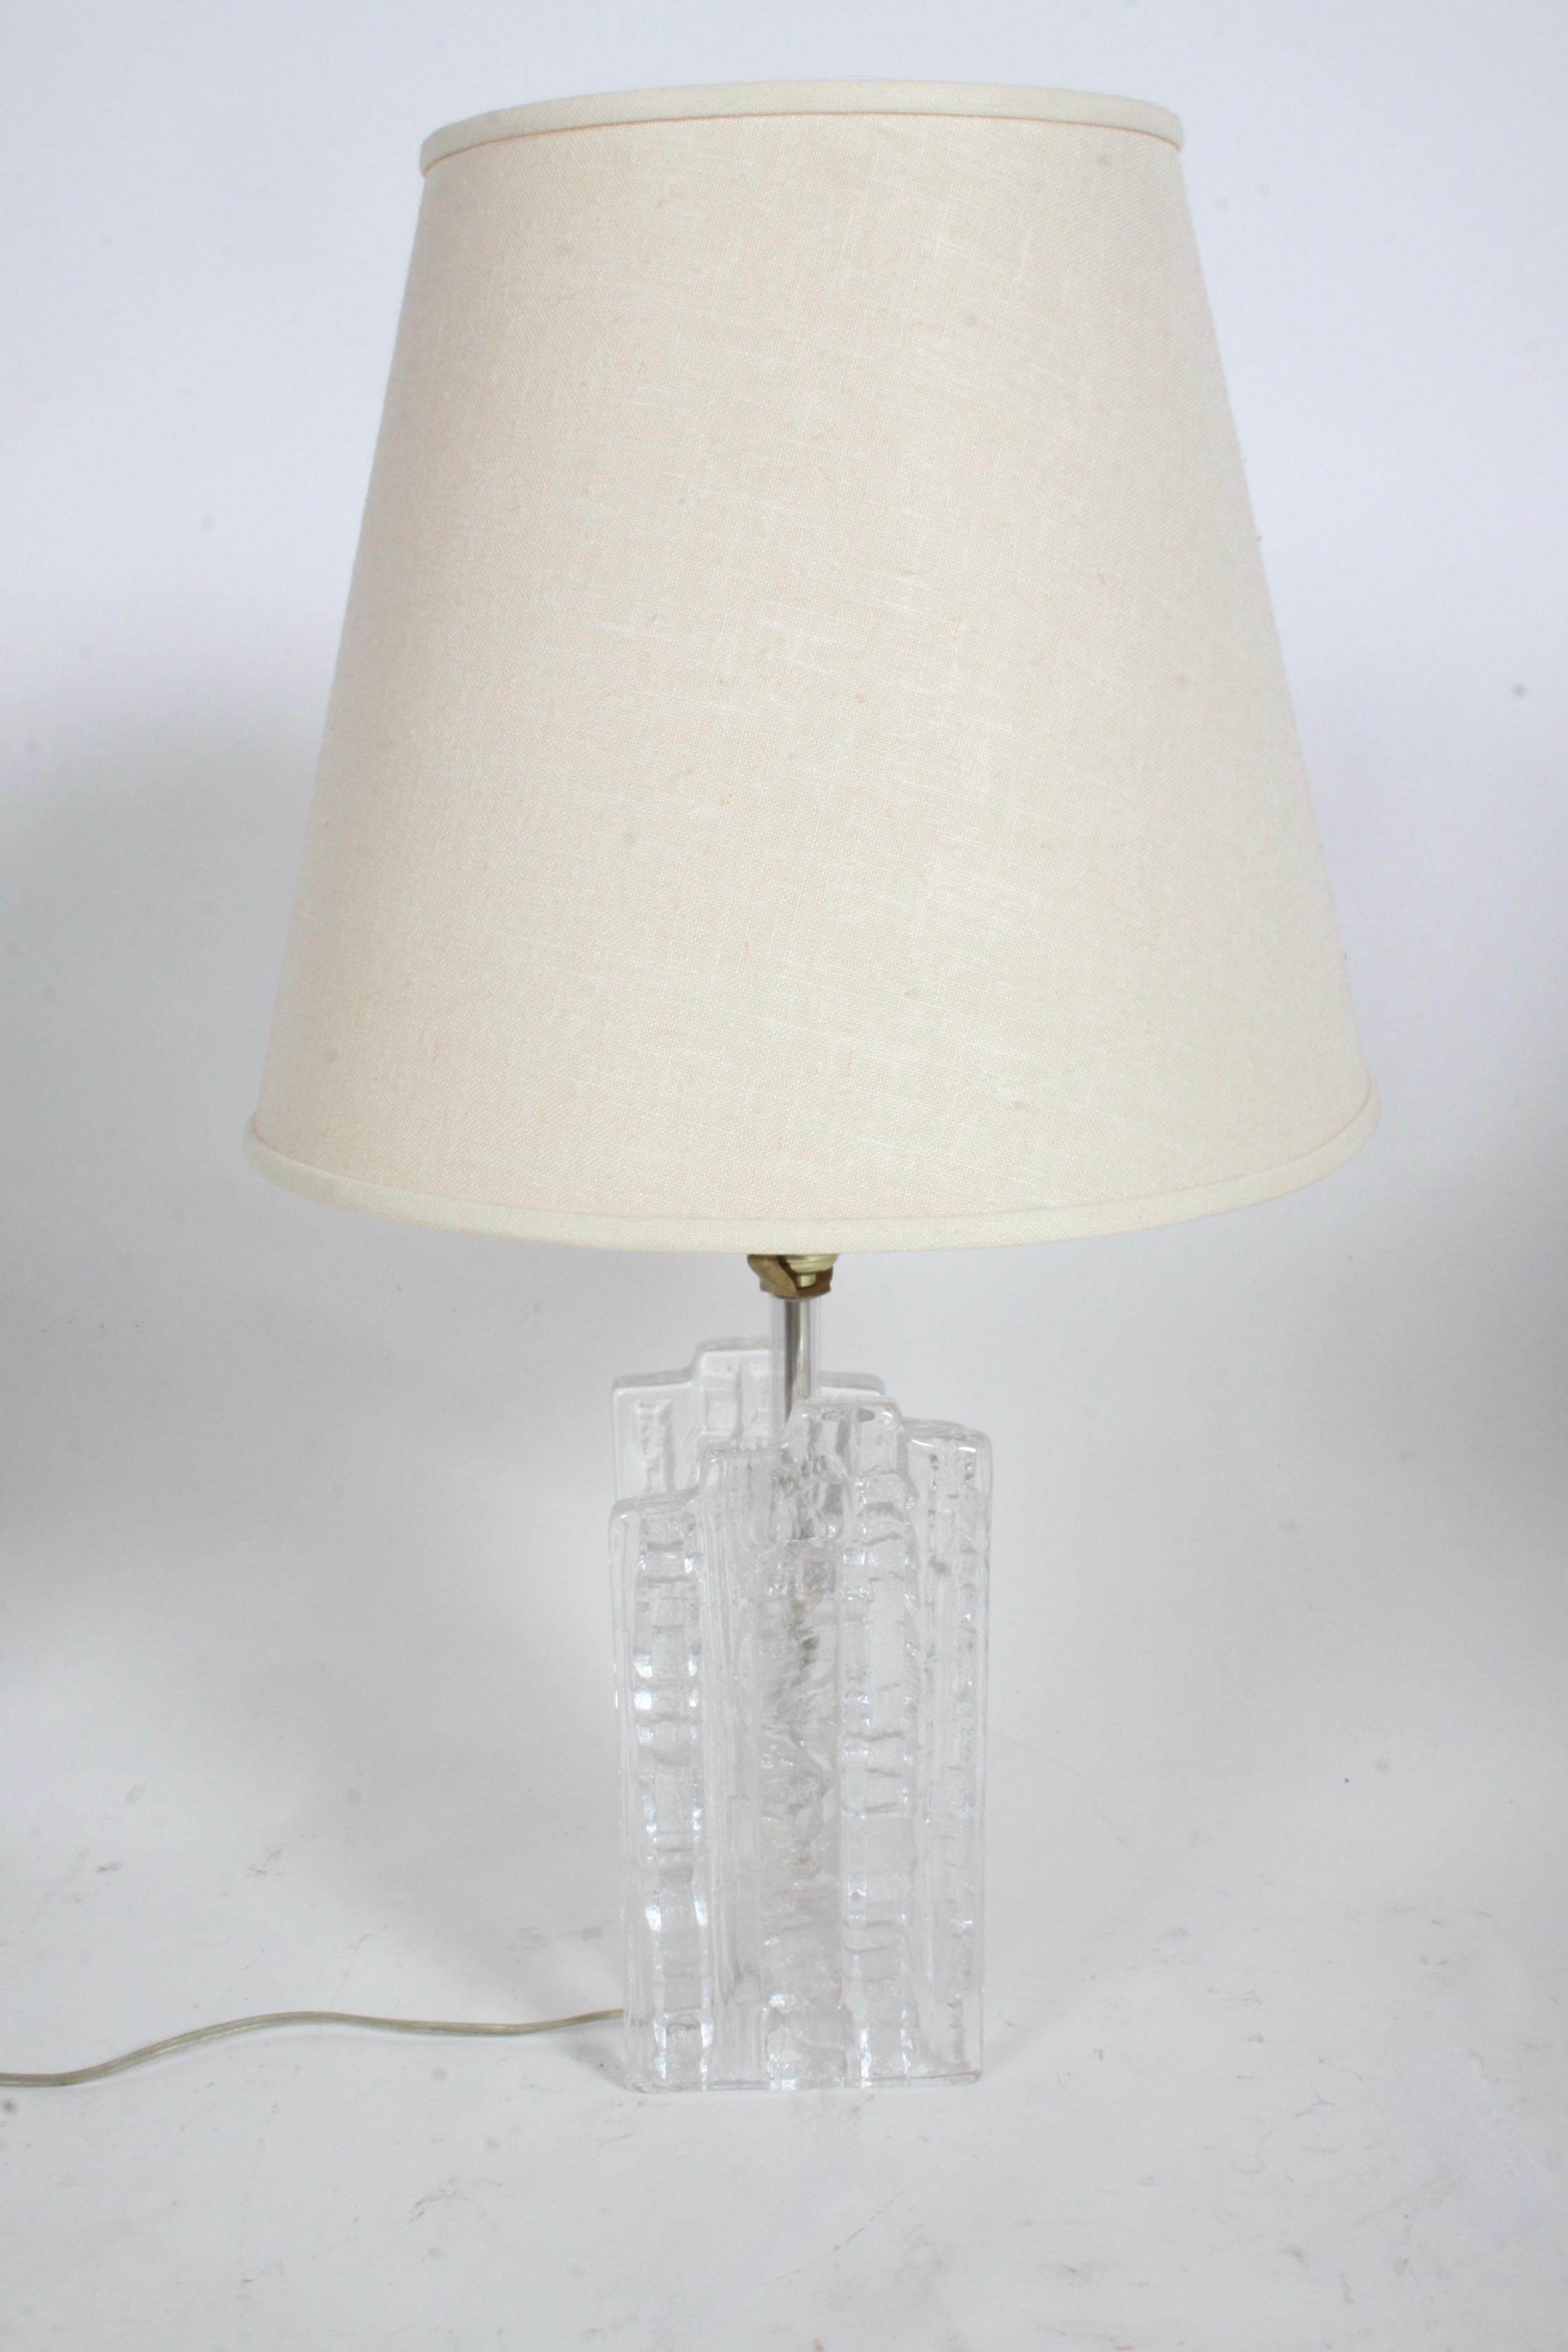 Scandinavian Modern Uno Westerberg for Pukeberg table lamp with textured and sculpted glass that resembles ice cubes, Sweden, circa 1960s. Label intact. Shade not included. Three-way socket. Measure: 24.25